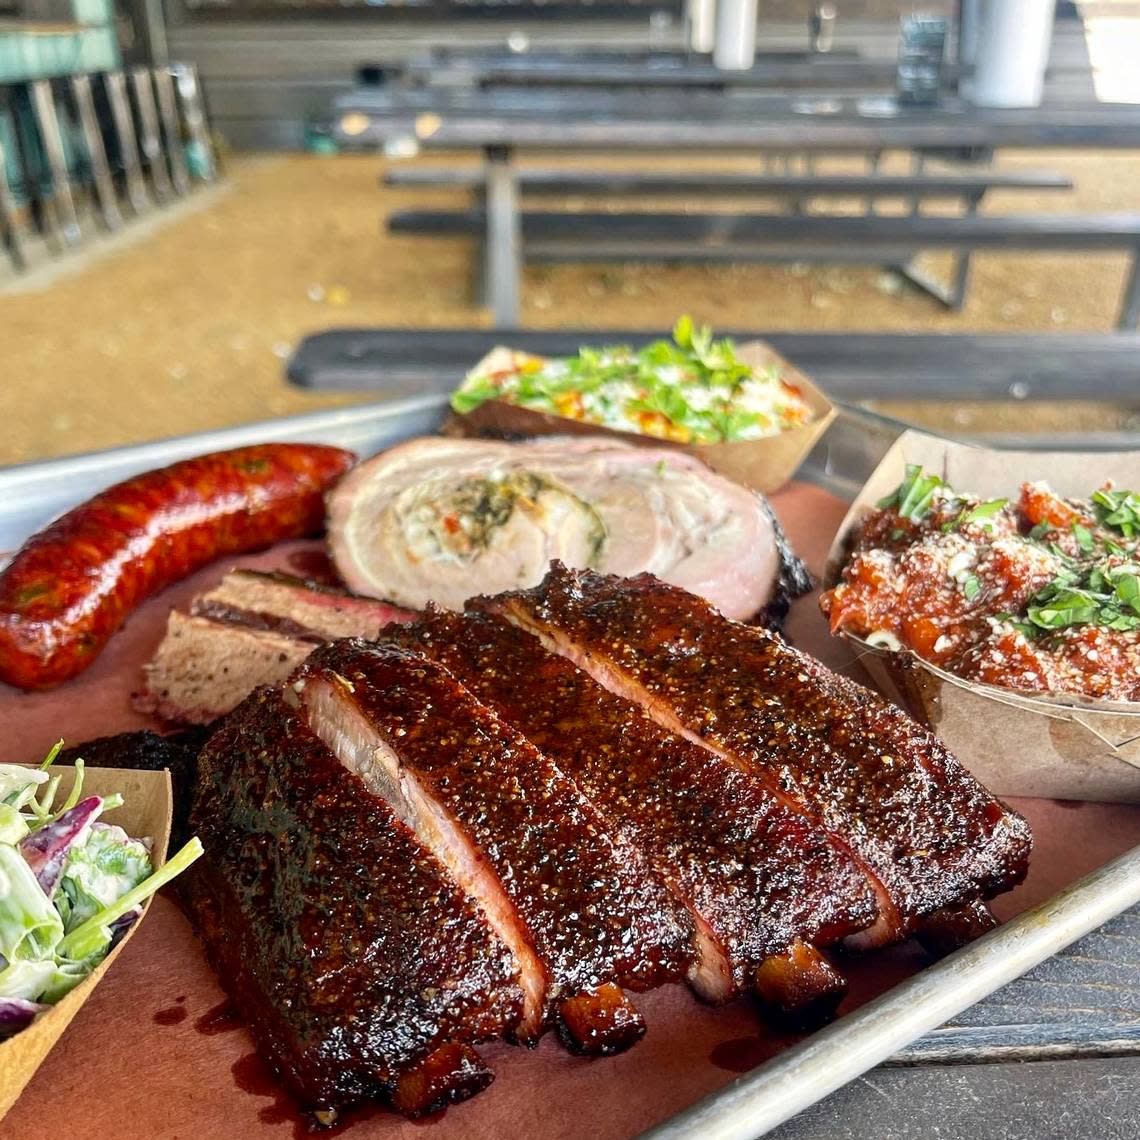 Ribs, stuffed pork belly,. sausage and sides at Brix Barbecue in Fort Worth. Handout photo